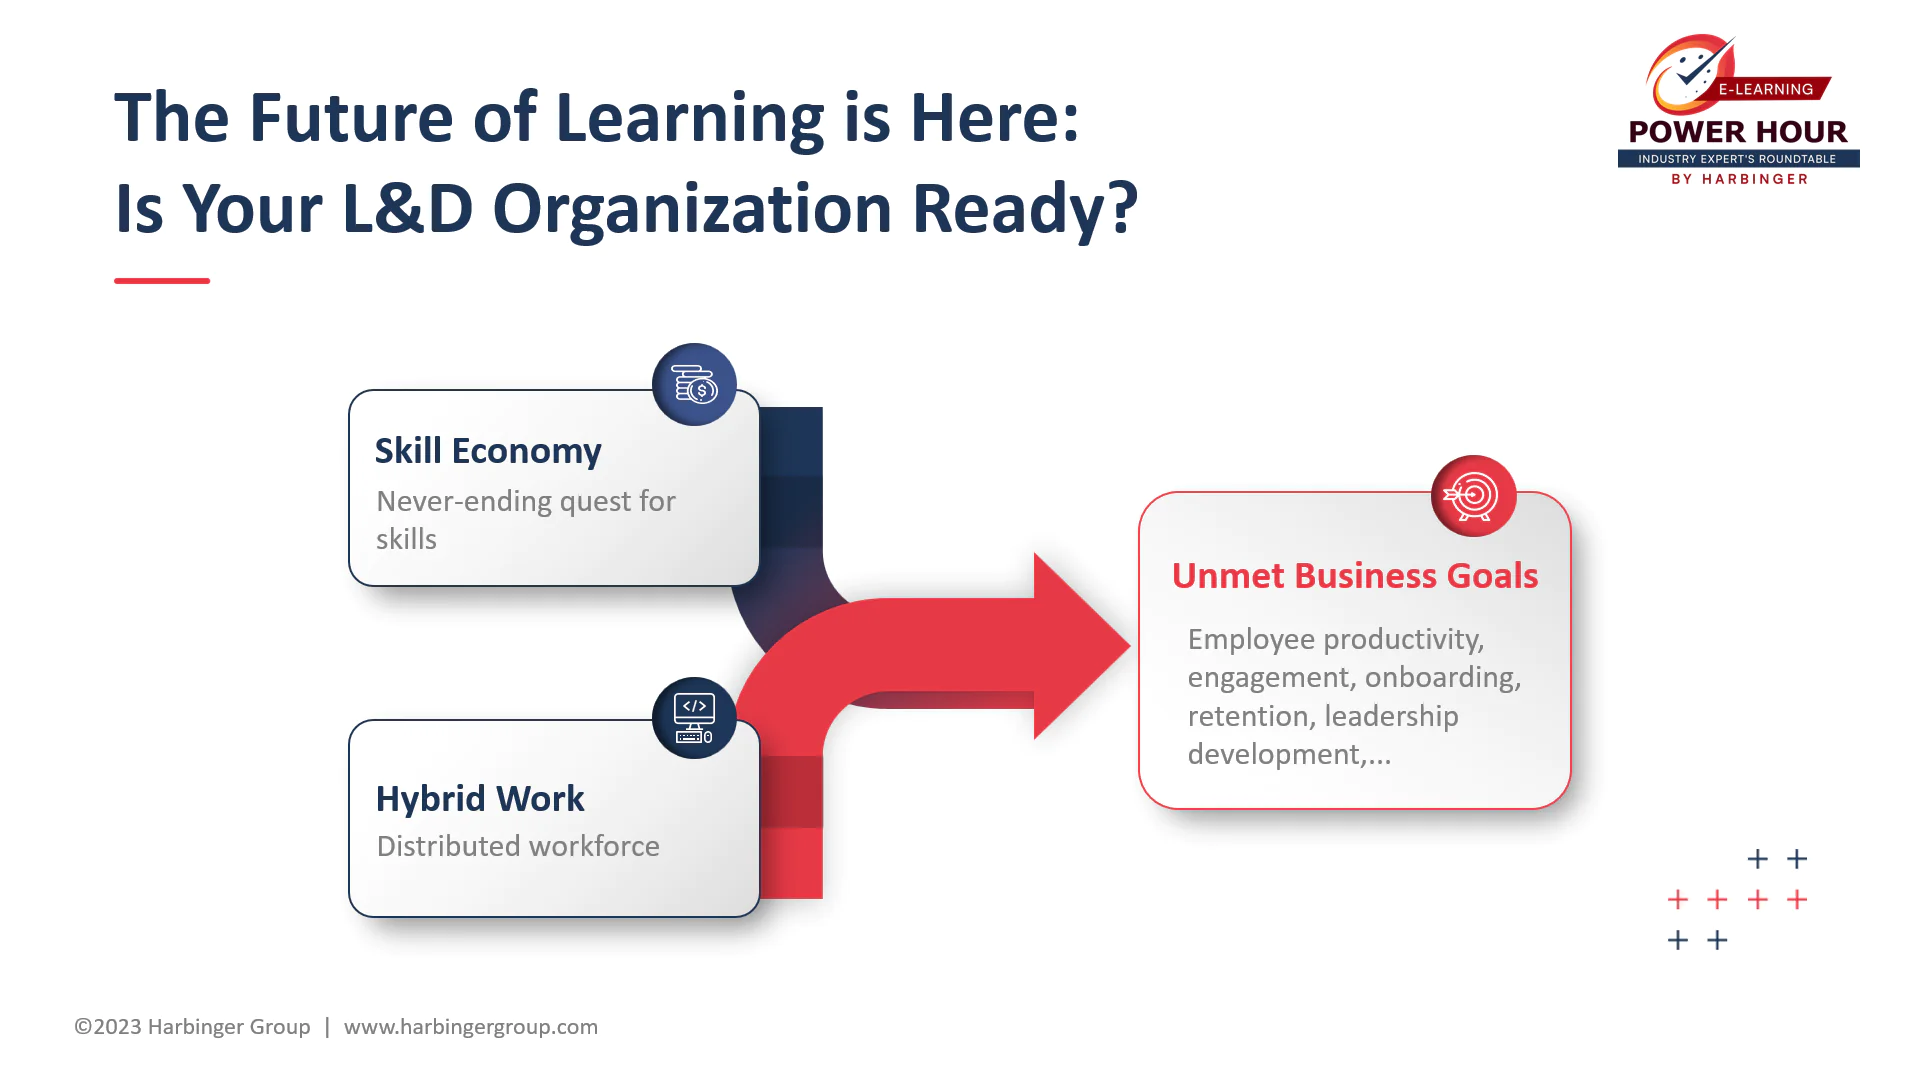 The Future of Learning is Here: Is Your L&D Organization Ready